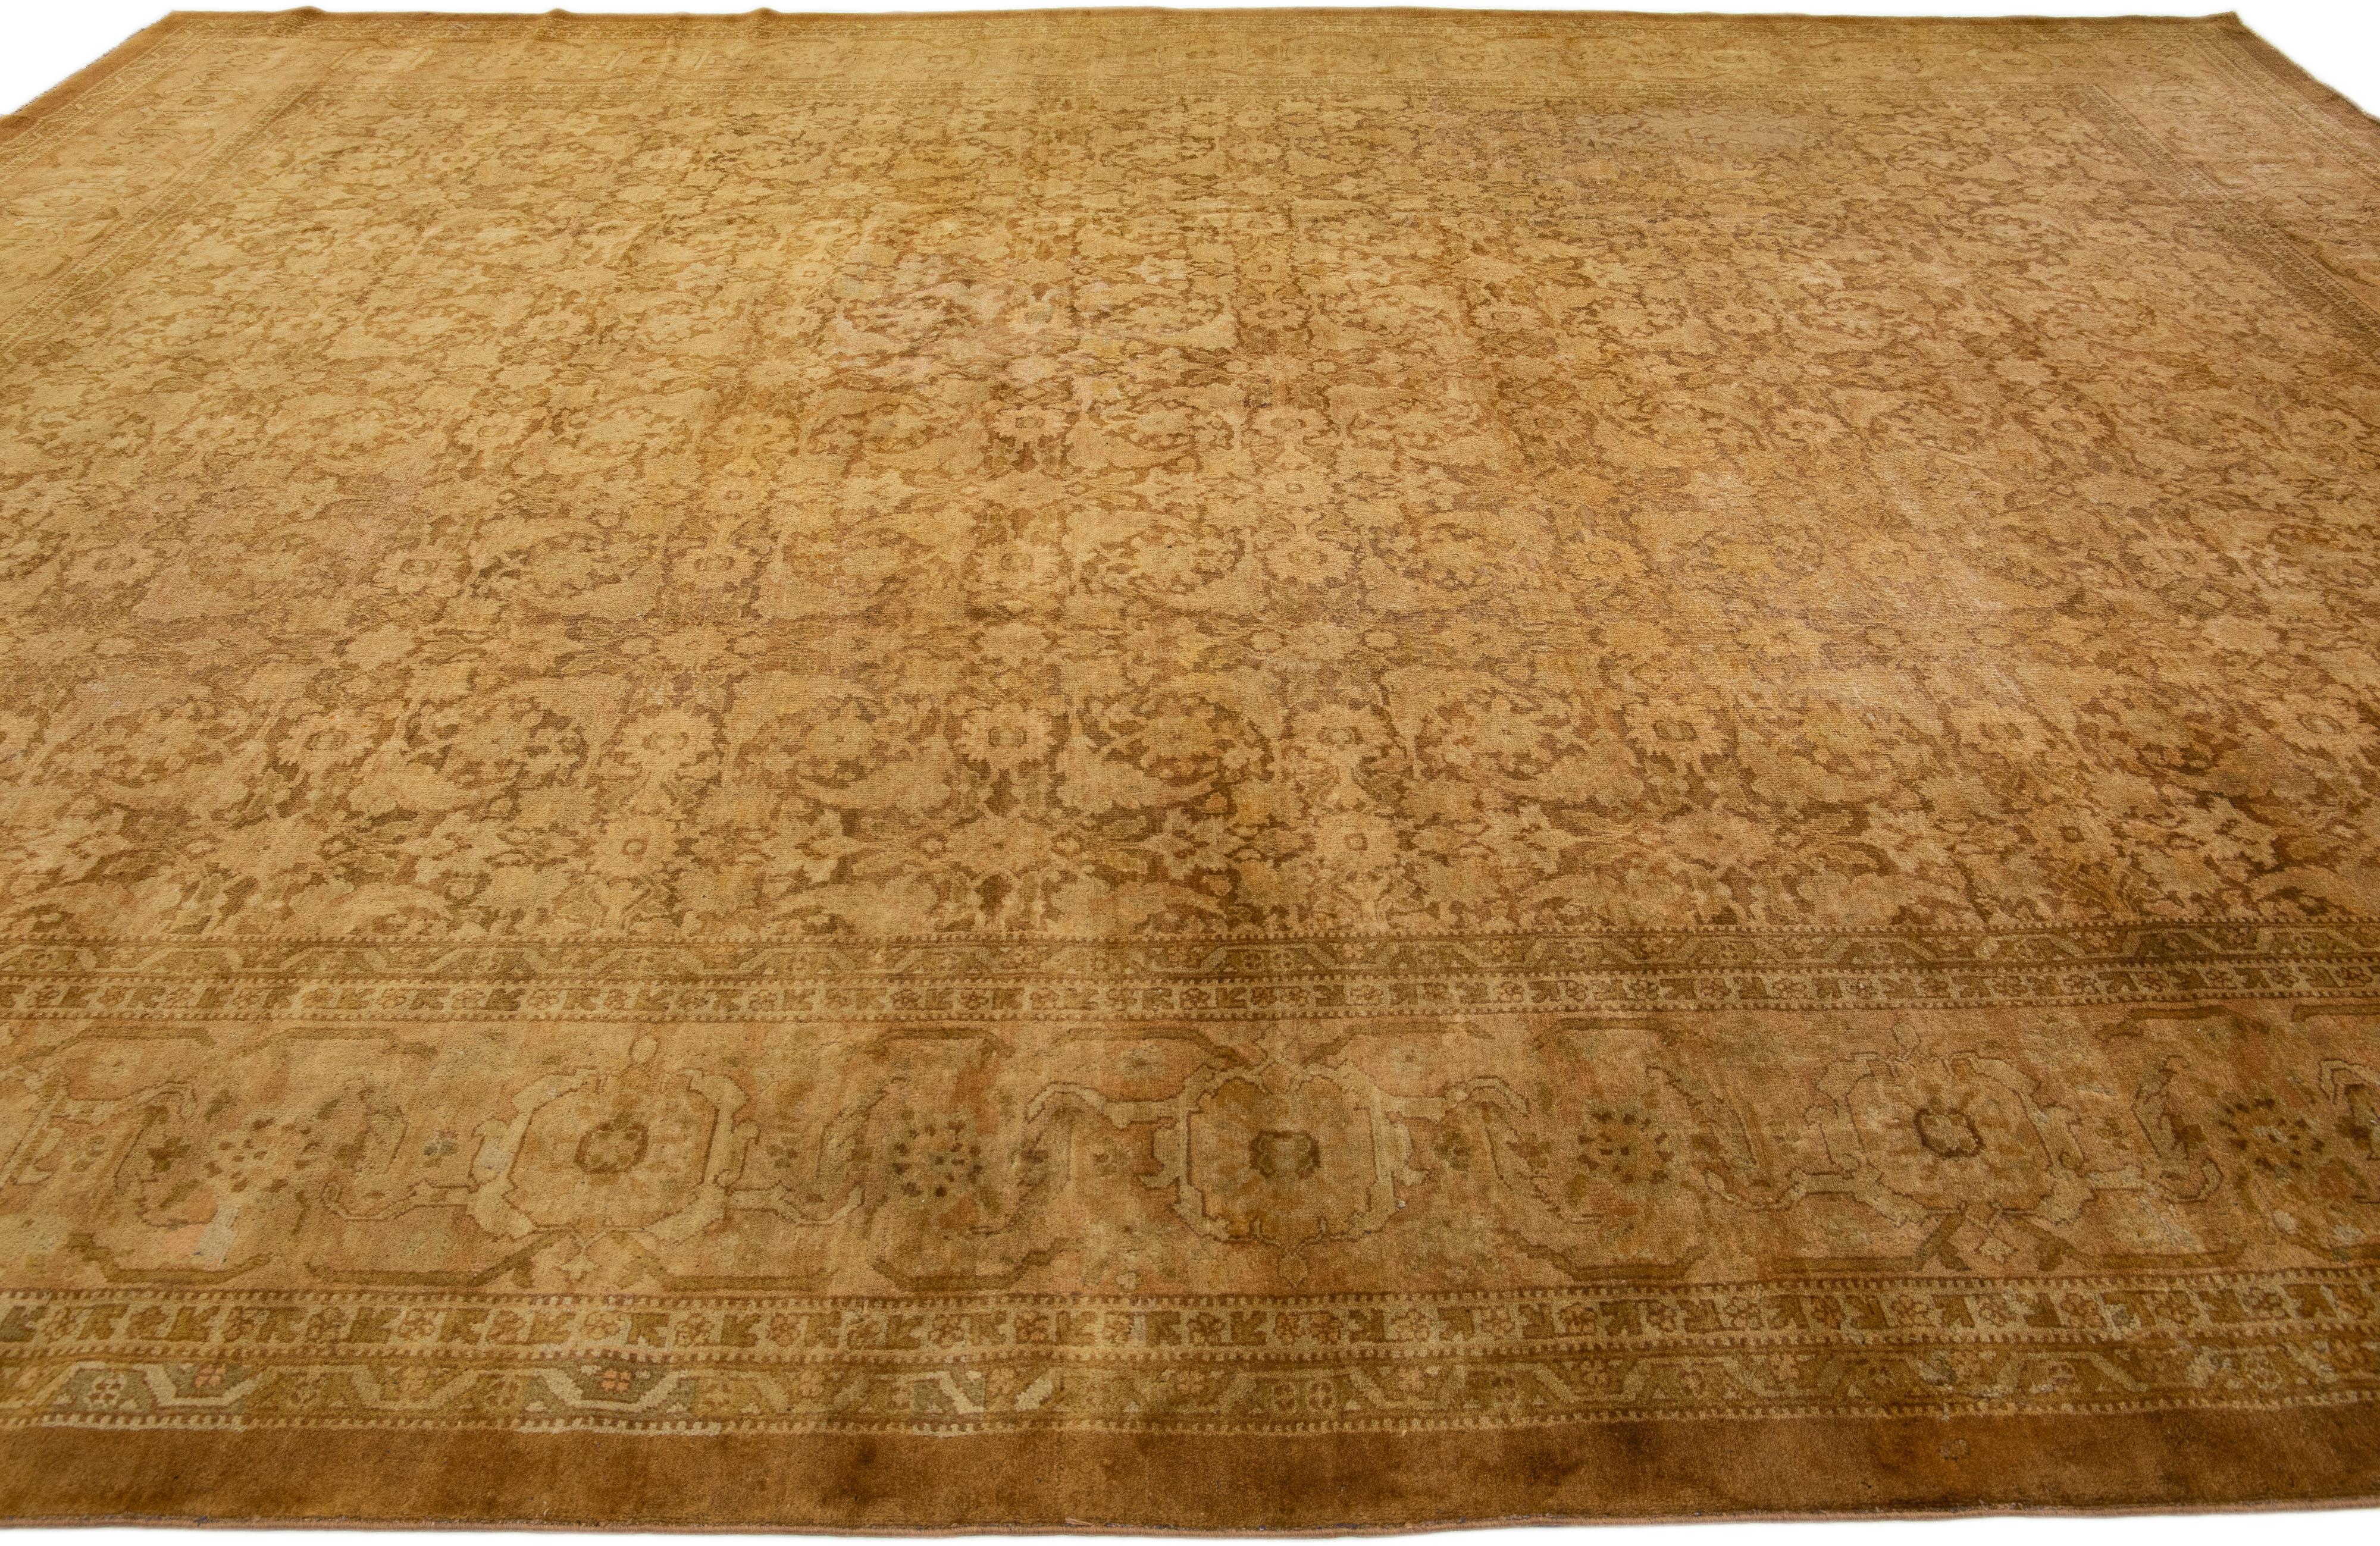 Antique Indian Agra Tan Handmade Wool Rug with Allover Design In Good Condition For Sale In Norwalk, CT